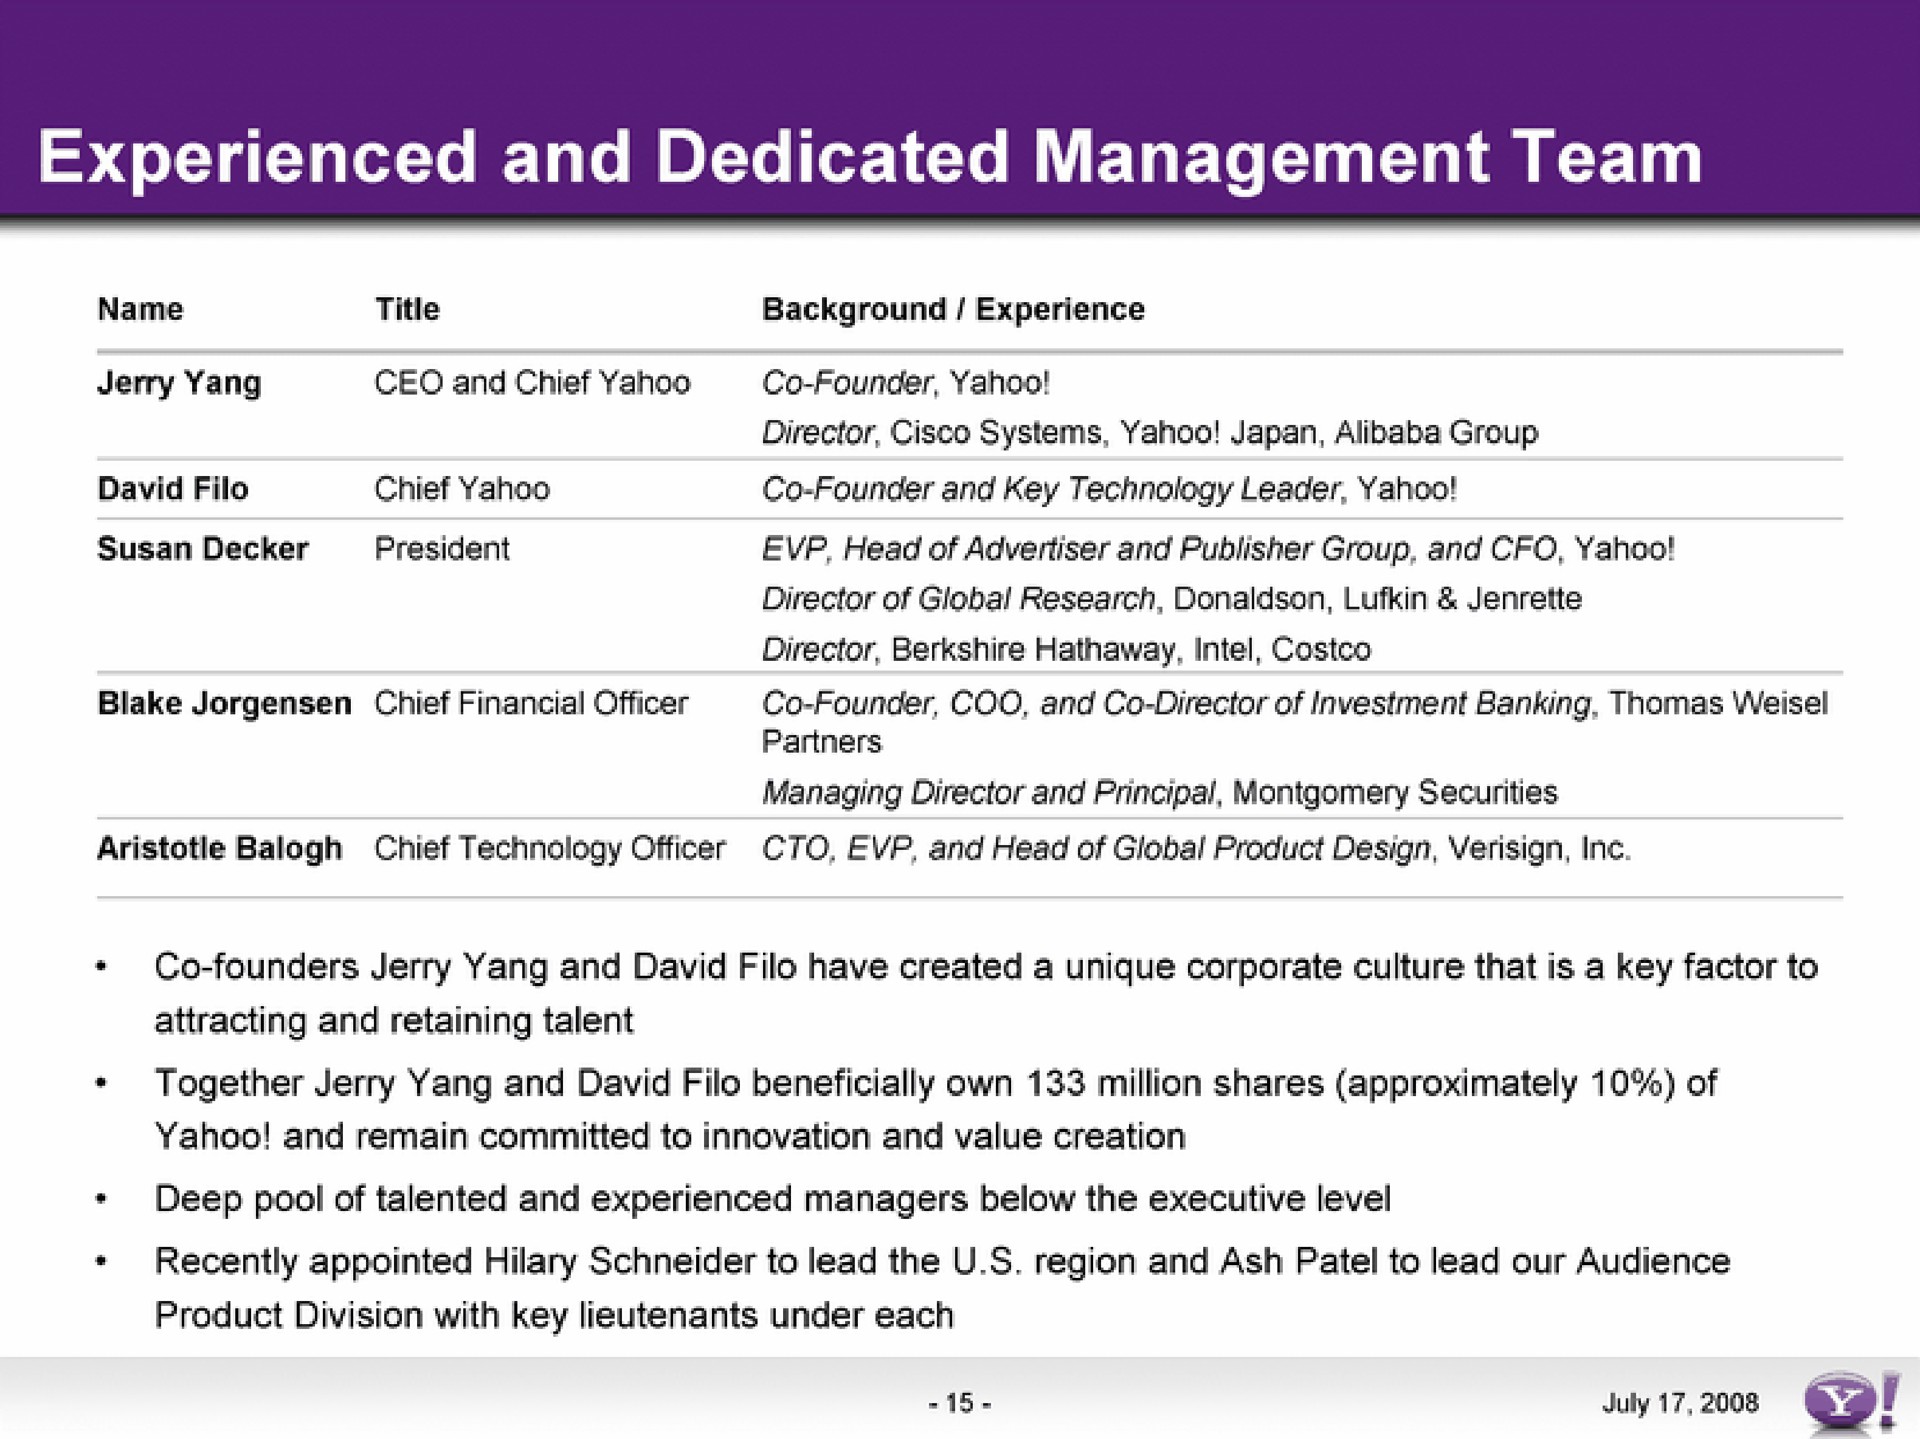 experienced and dedicated management team | Yahoo